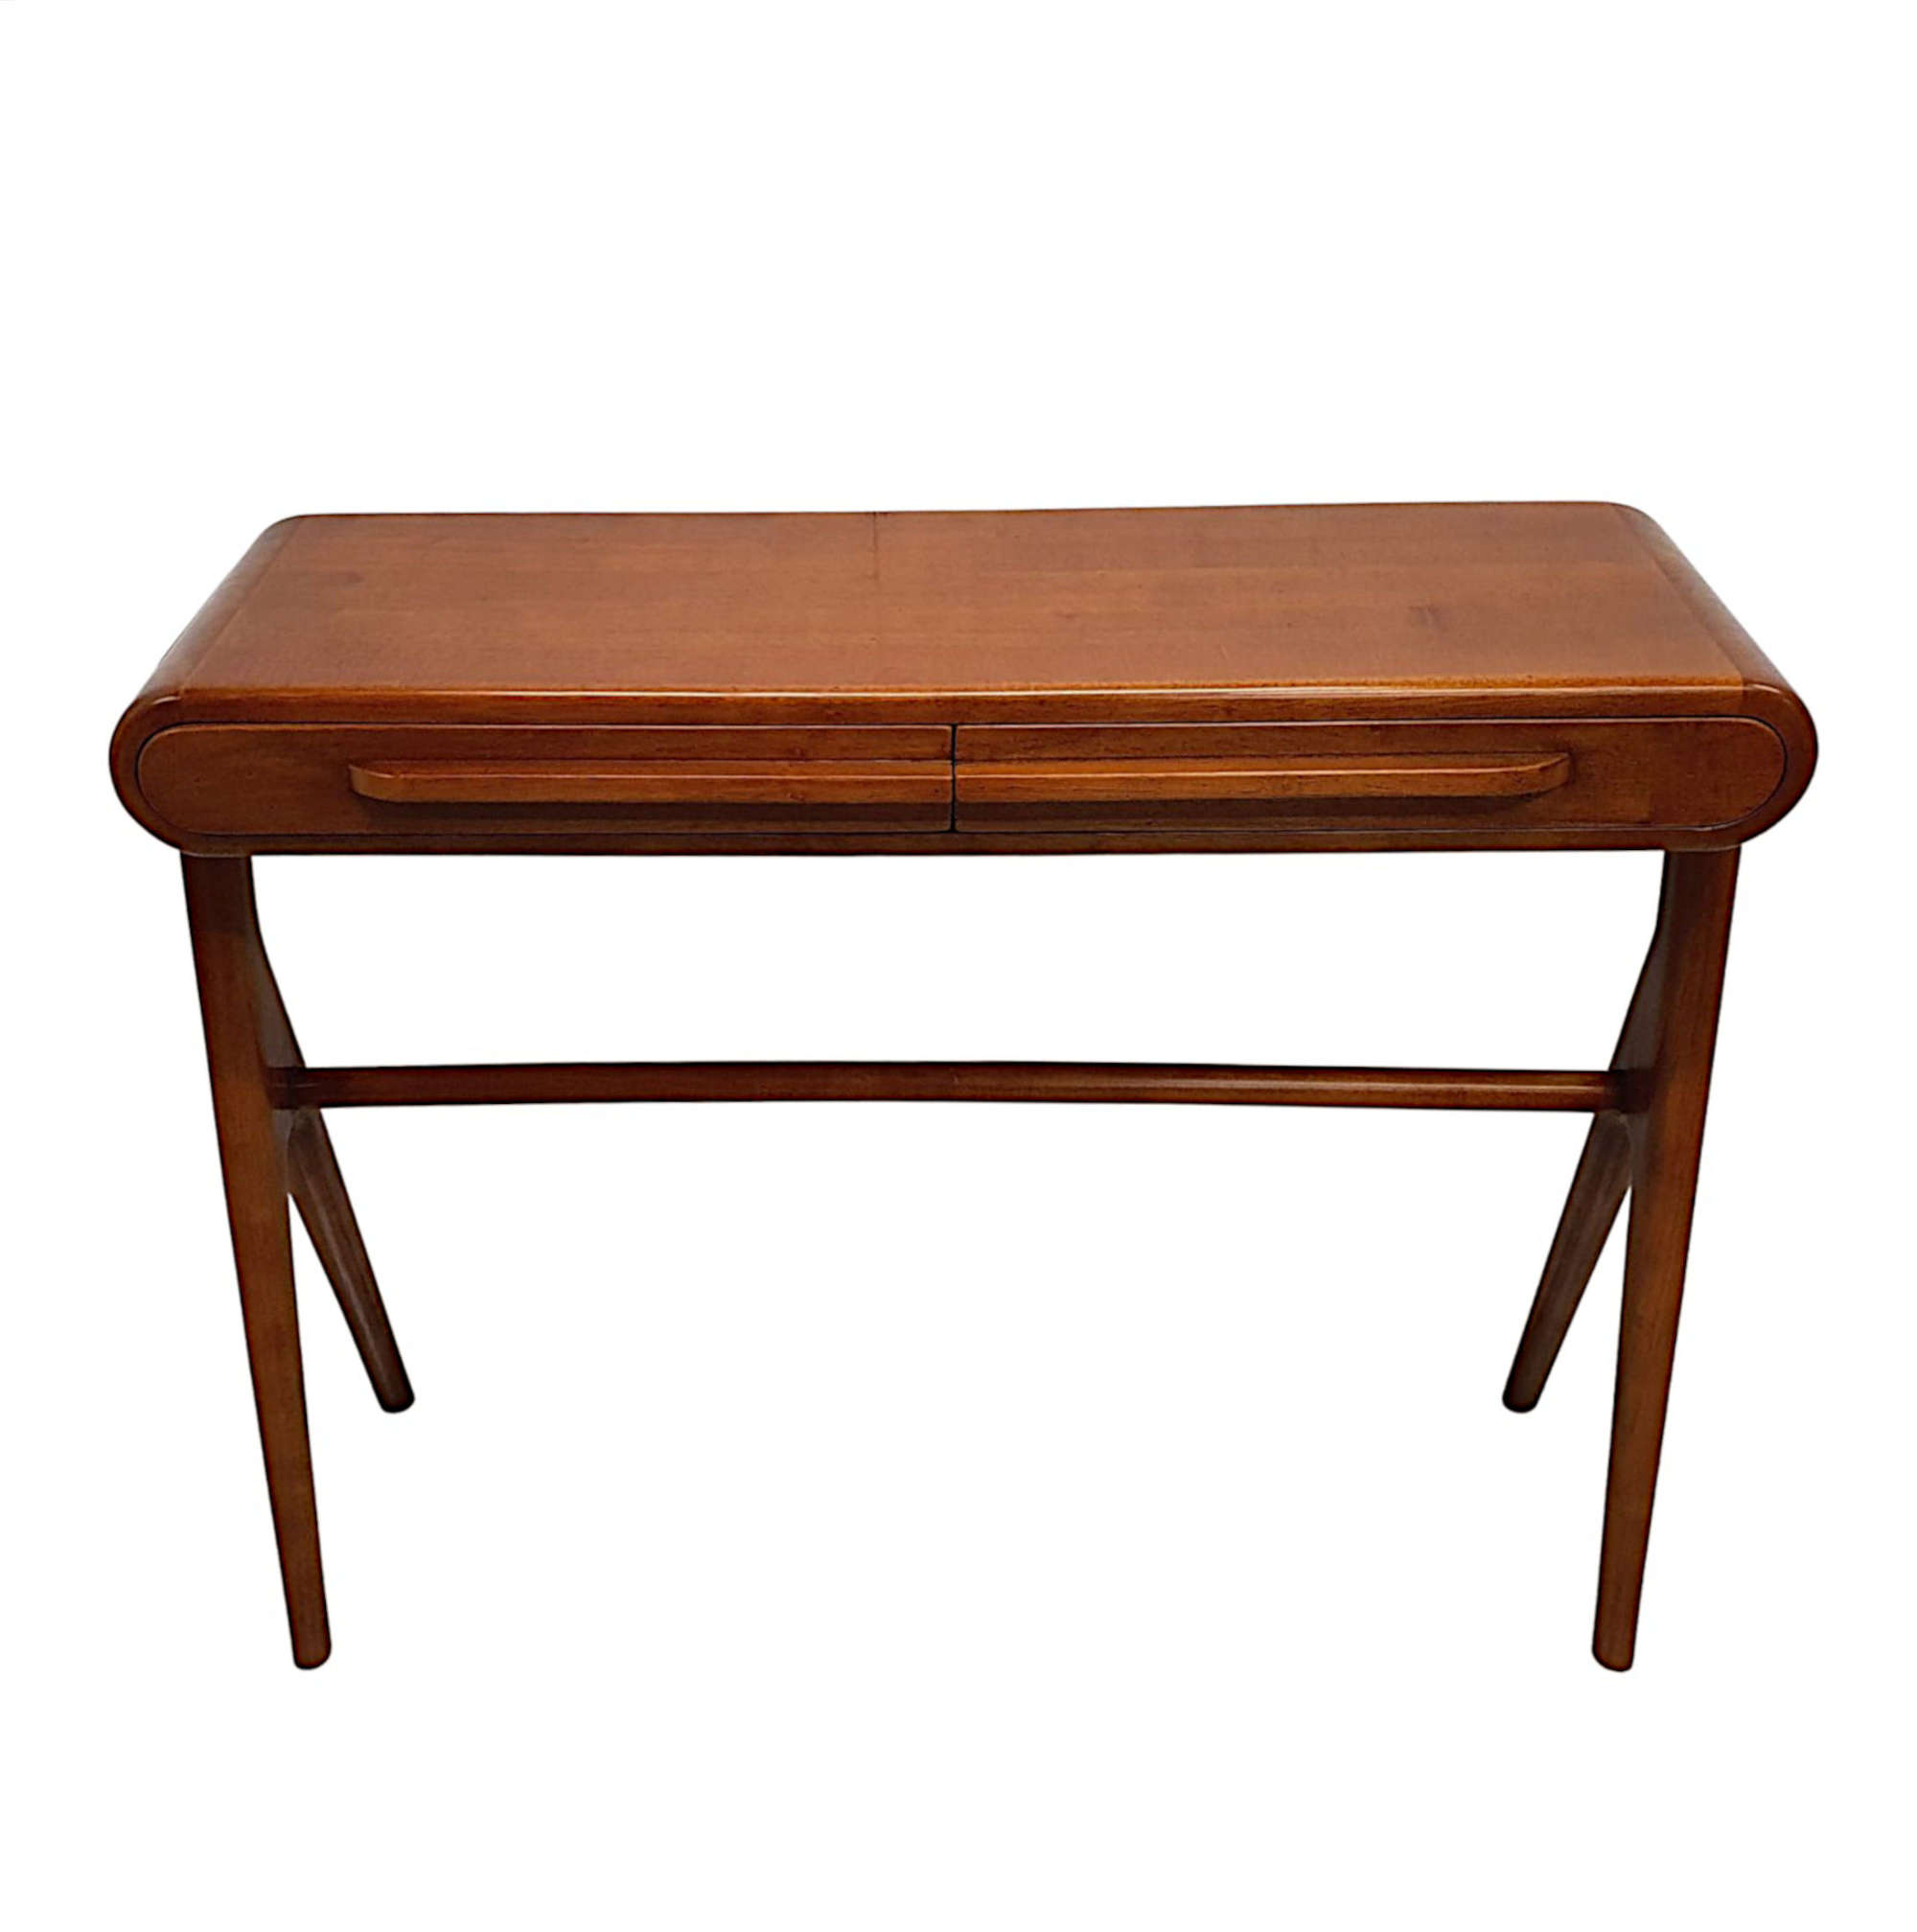 A Very Fine Contemporary Mid Century Design Vintage Side Table